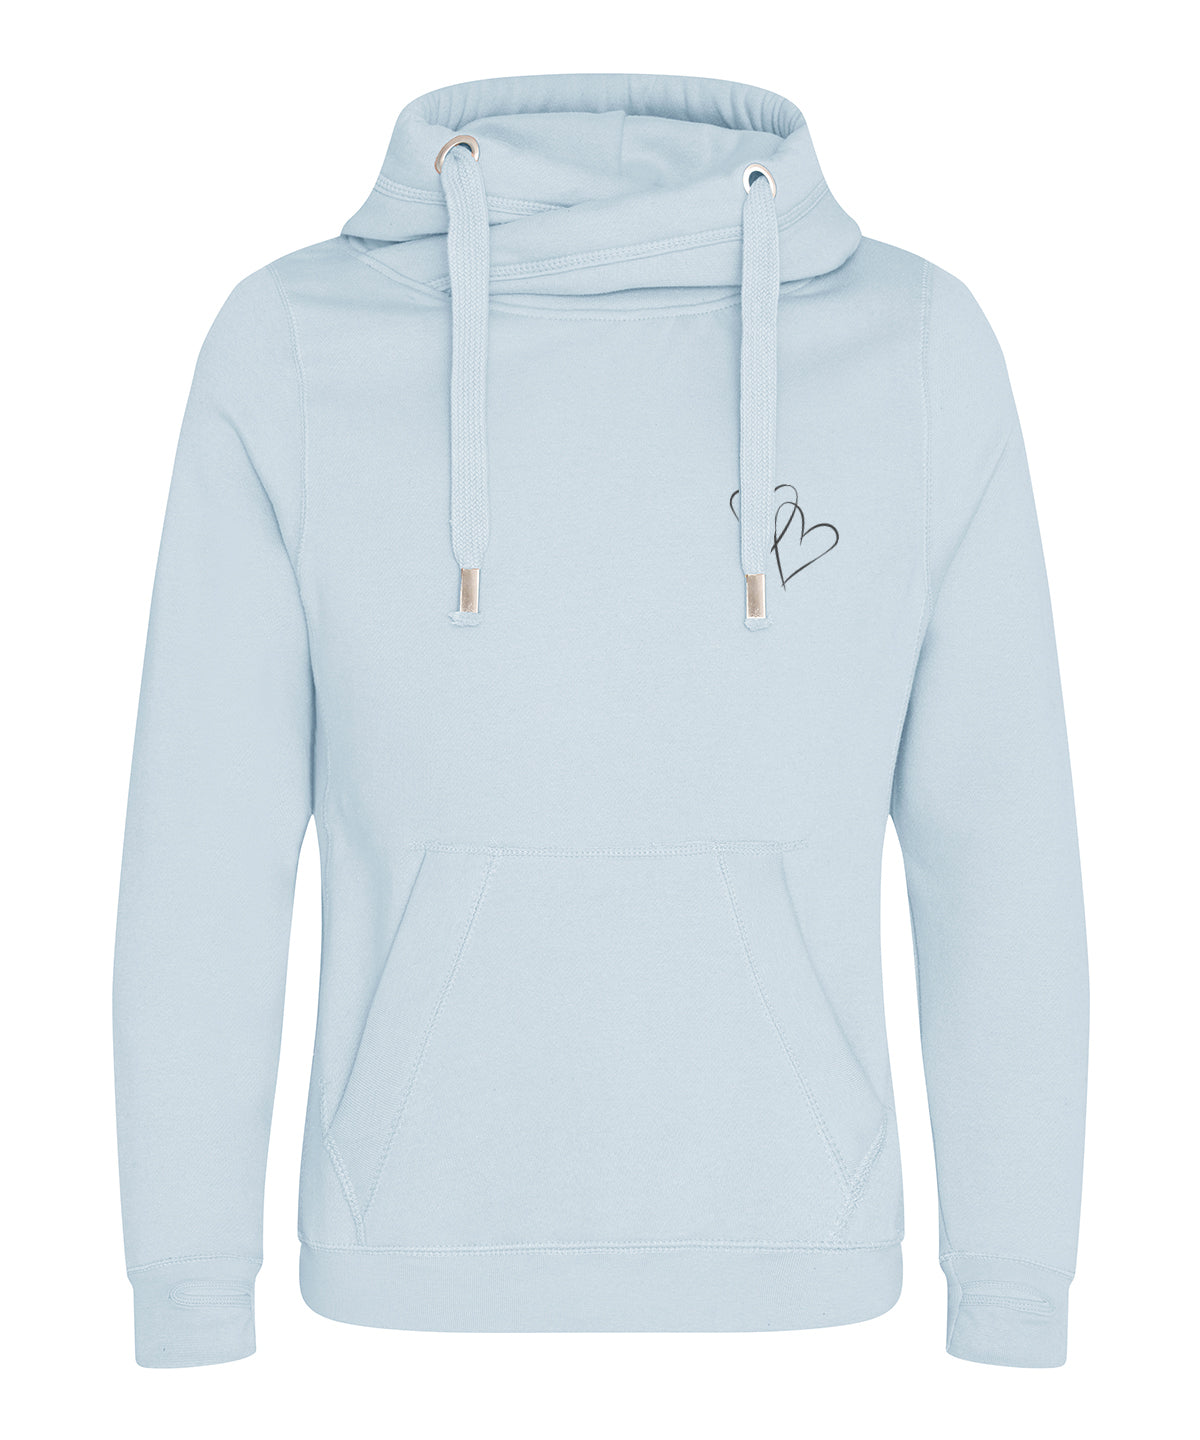 Linked Hearts Blue Cotton Urban Hoodie